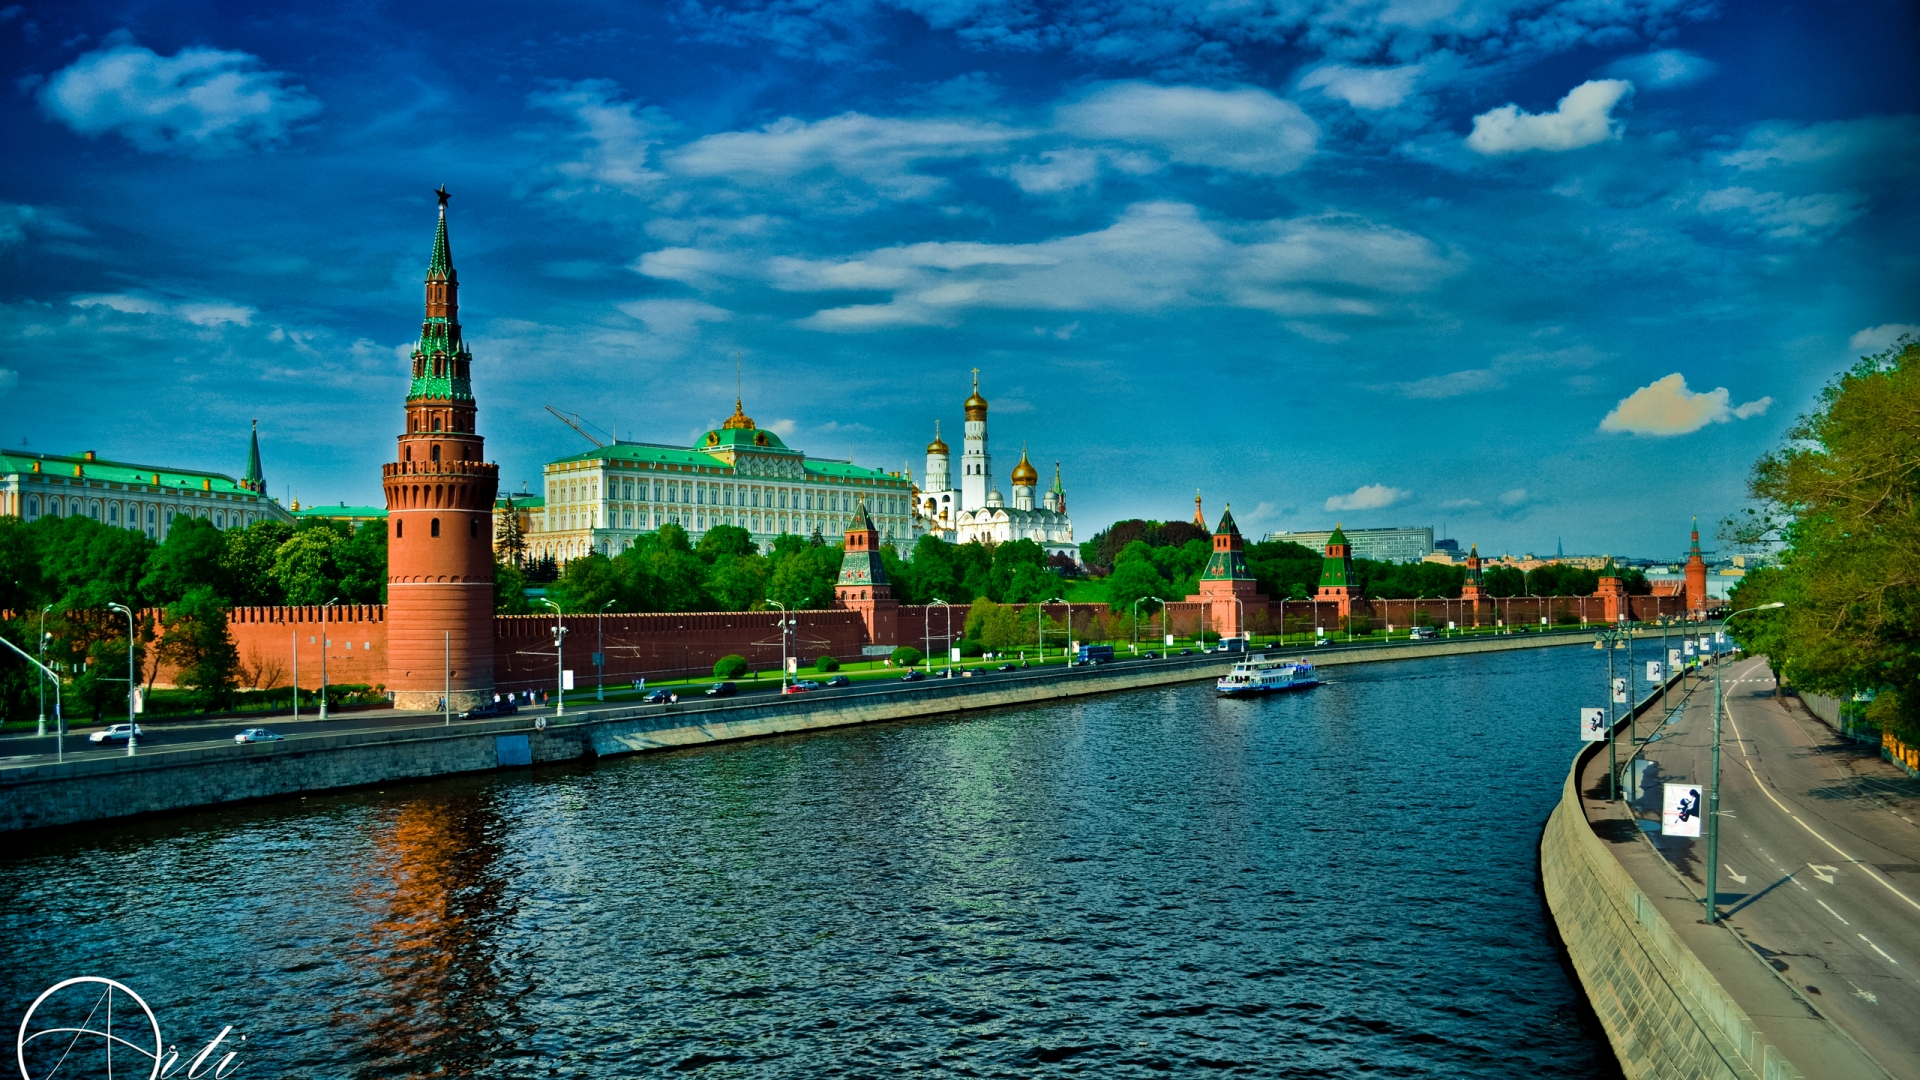 The Kremlin Moscow for 1920 x 1080 HDTV 1080p resolution